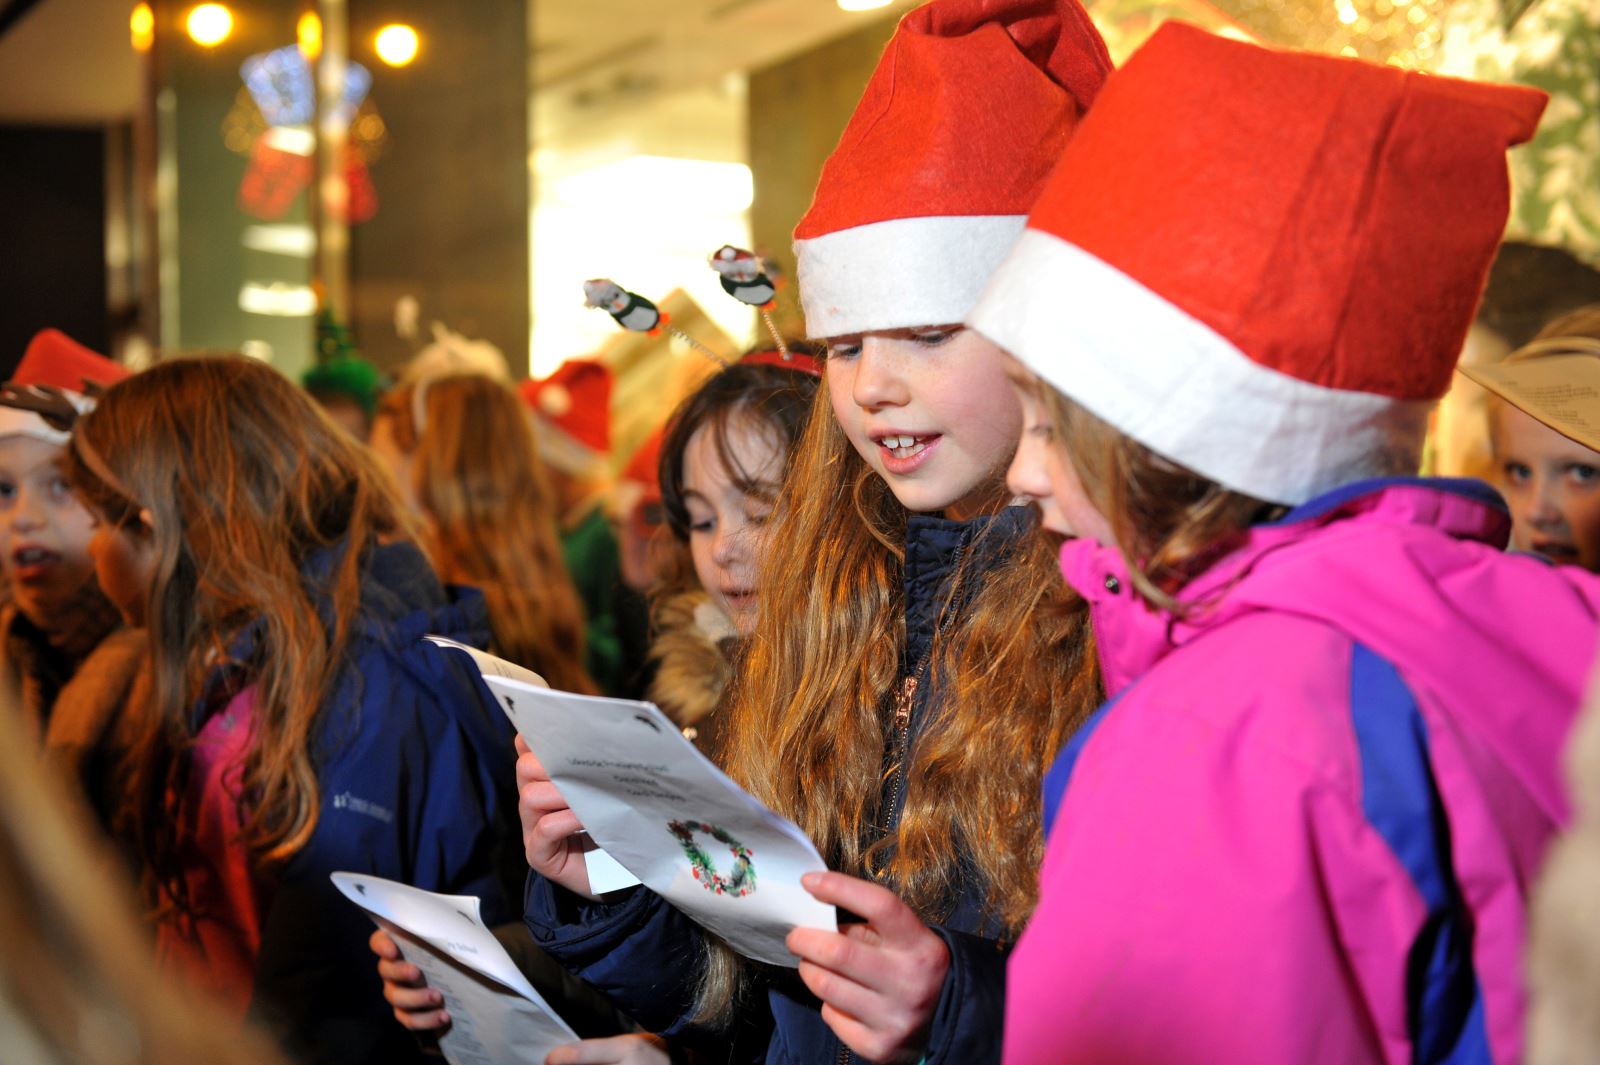 Carol singers during late night shopping event